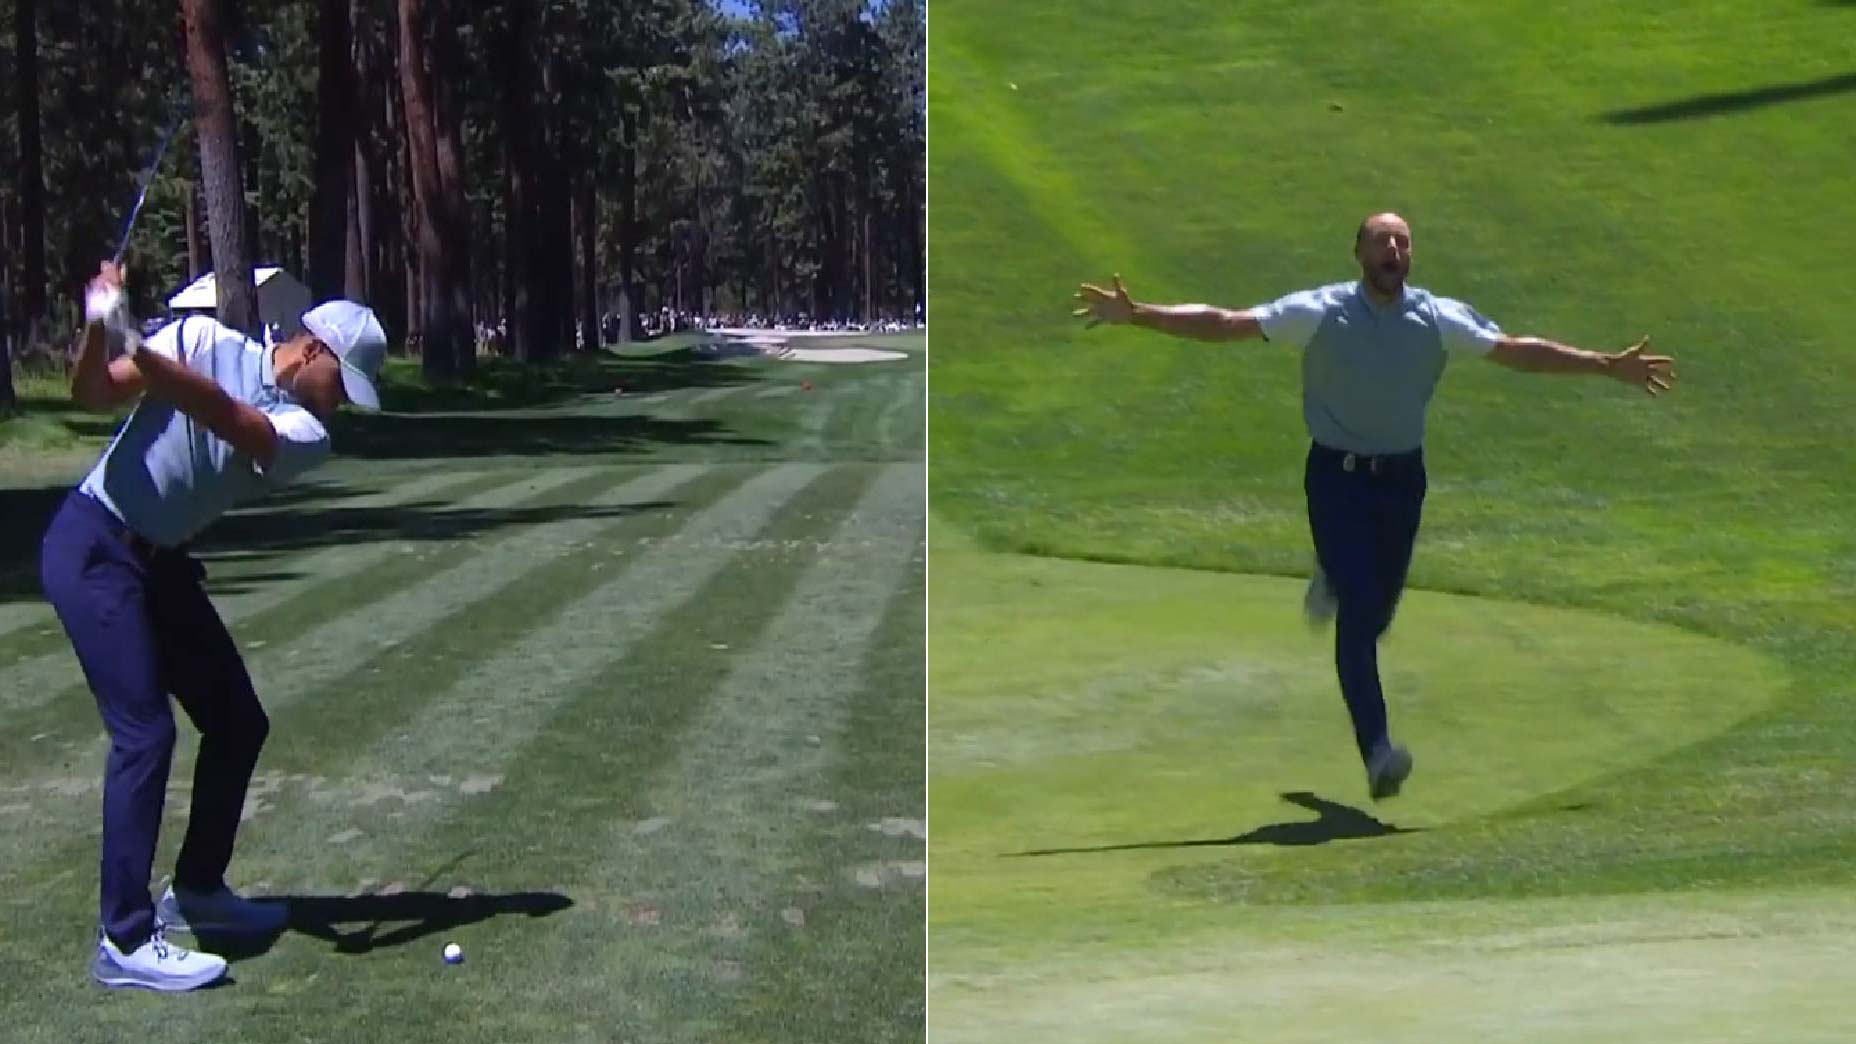 WATCH: Steph Curry caps 'unbelievable' hole-in-one with epic ...